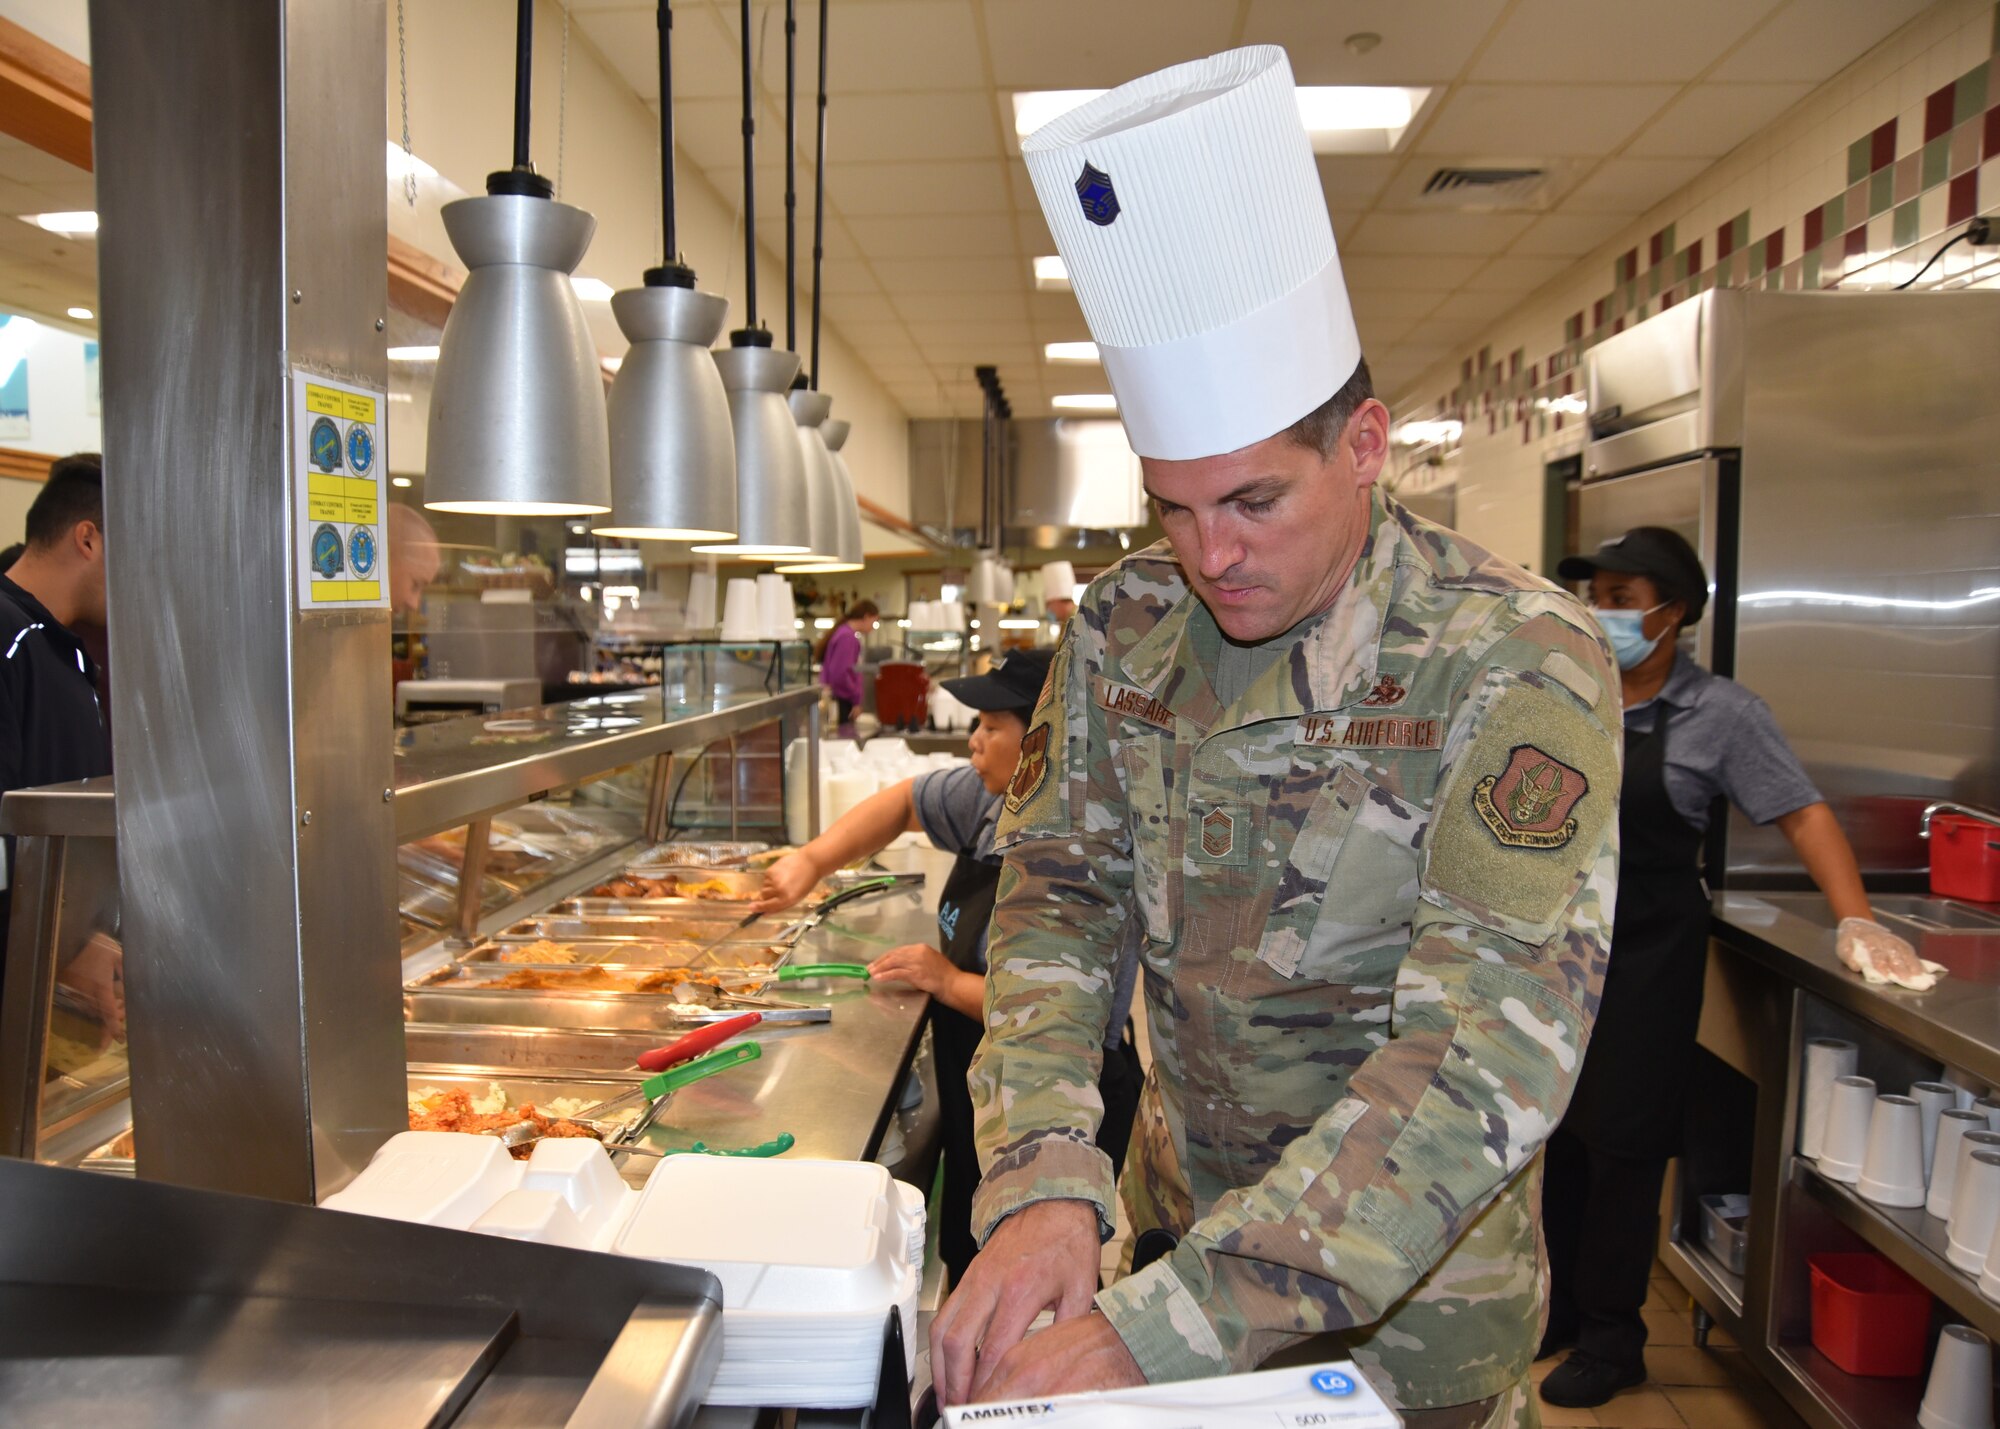 Chief Master Sgt. Tommy Lassabe reaches for plates to serve lunch.